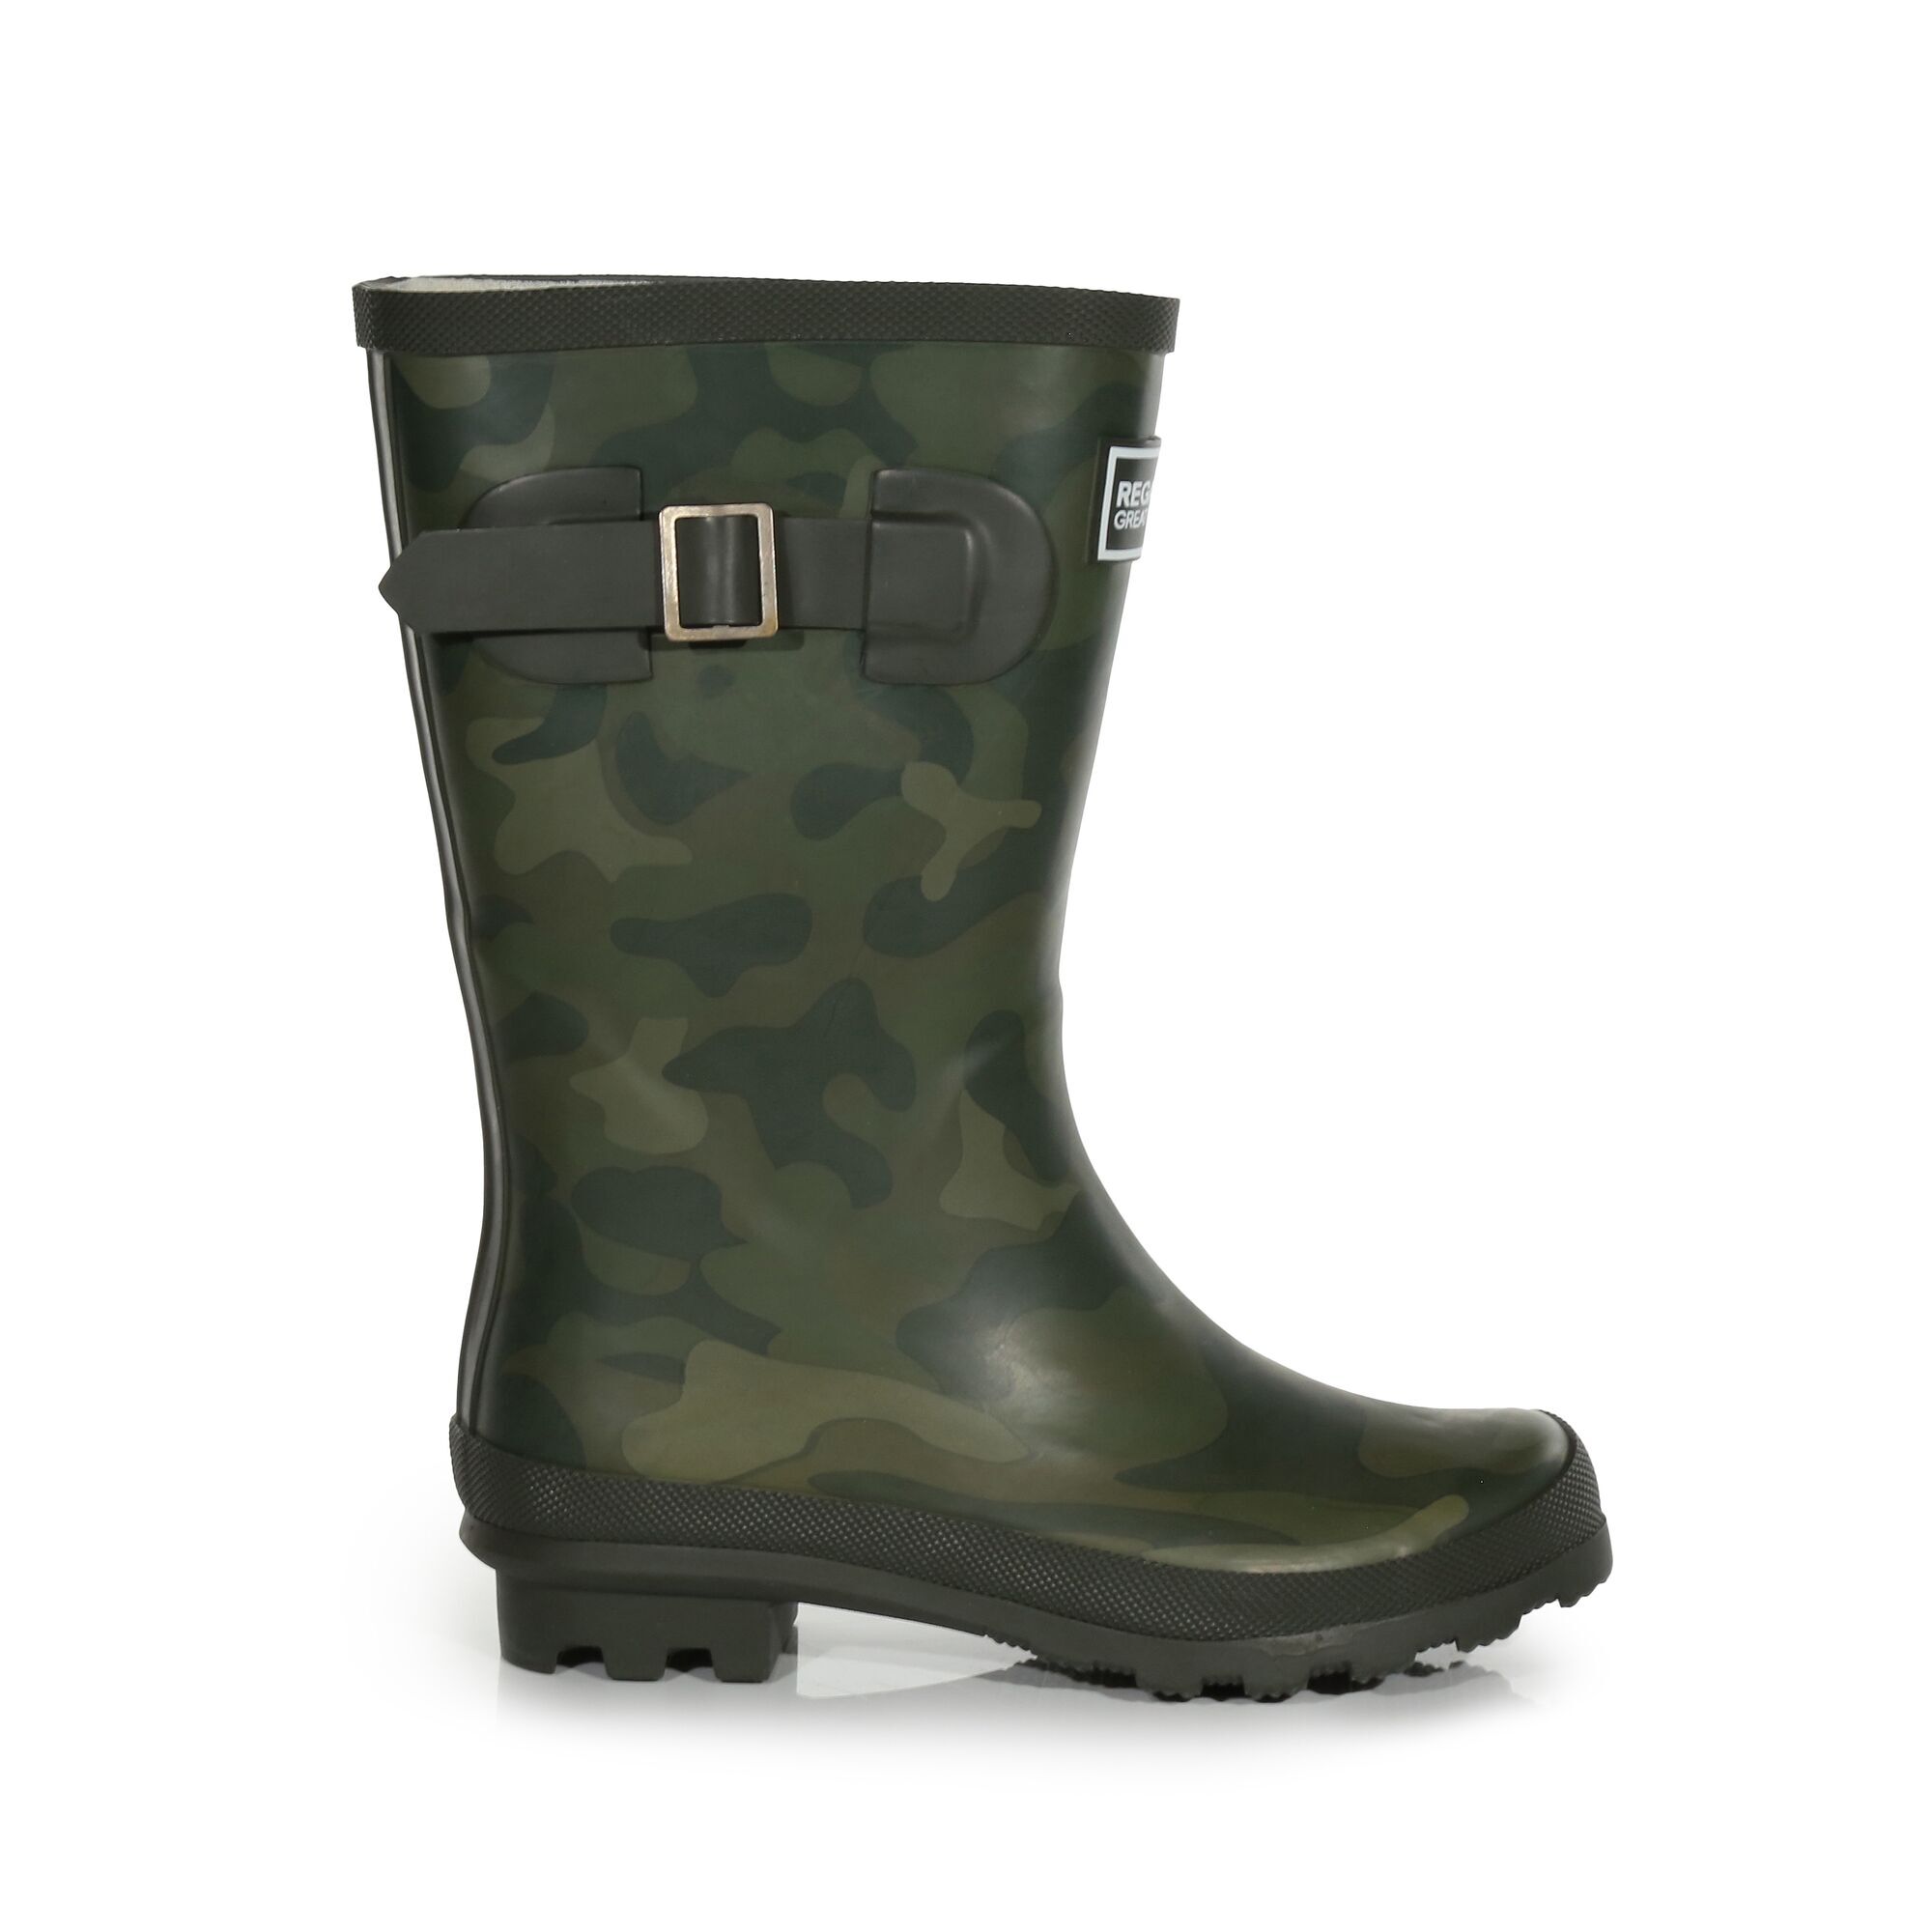 Baby's Green and Black Fairweather Camouflage Wellington Boots, Size: UK Infant 9 - Regatta